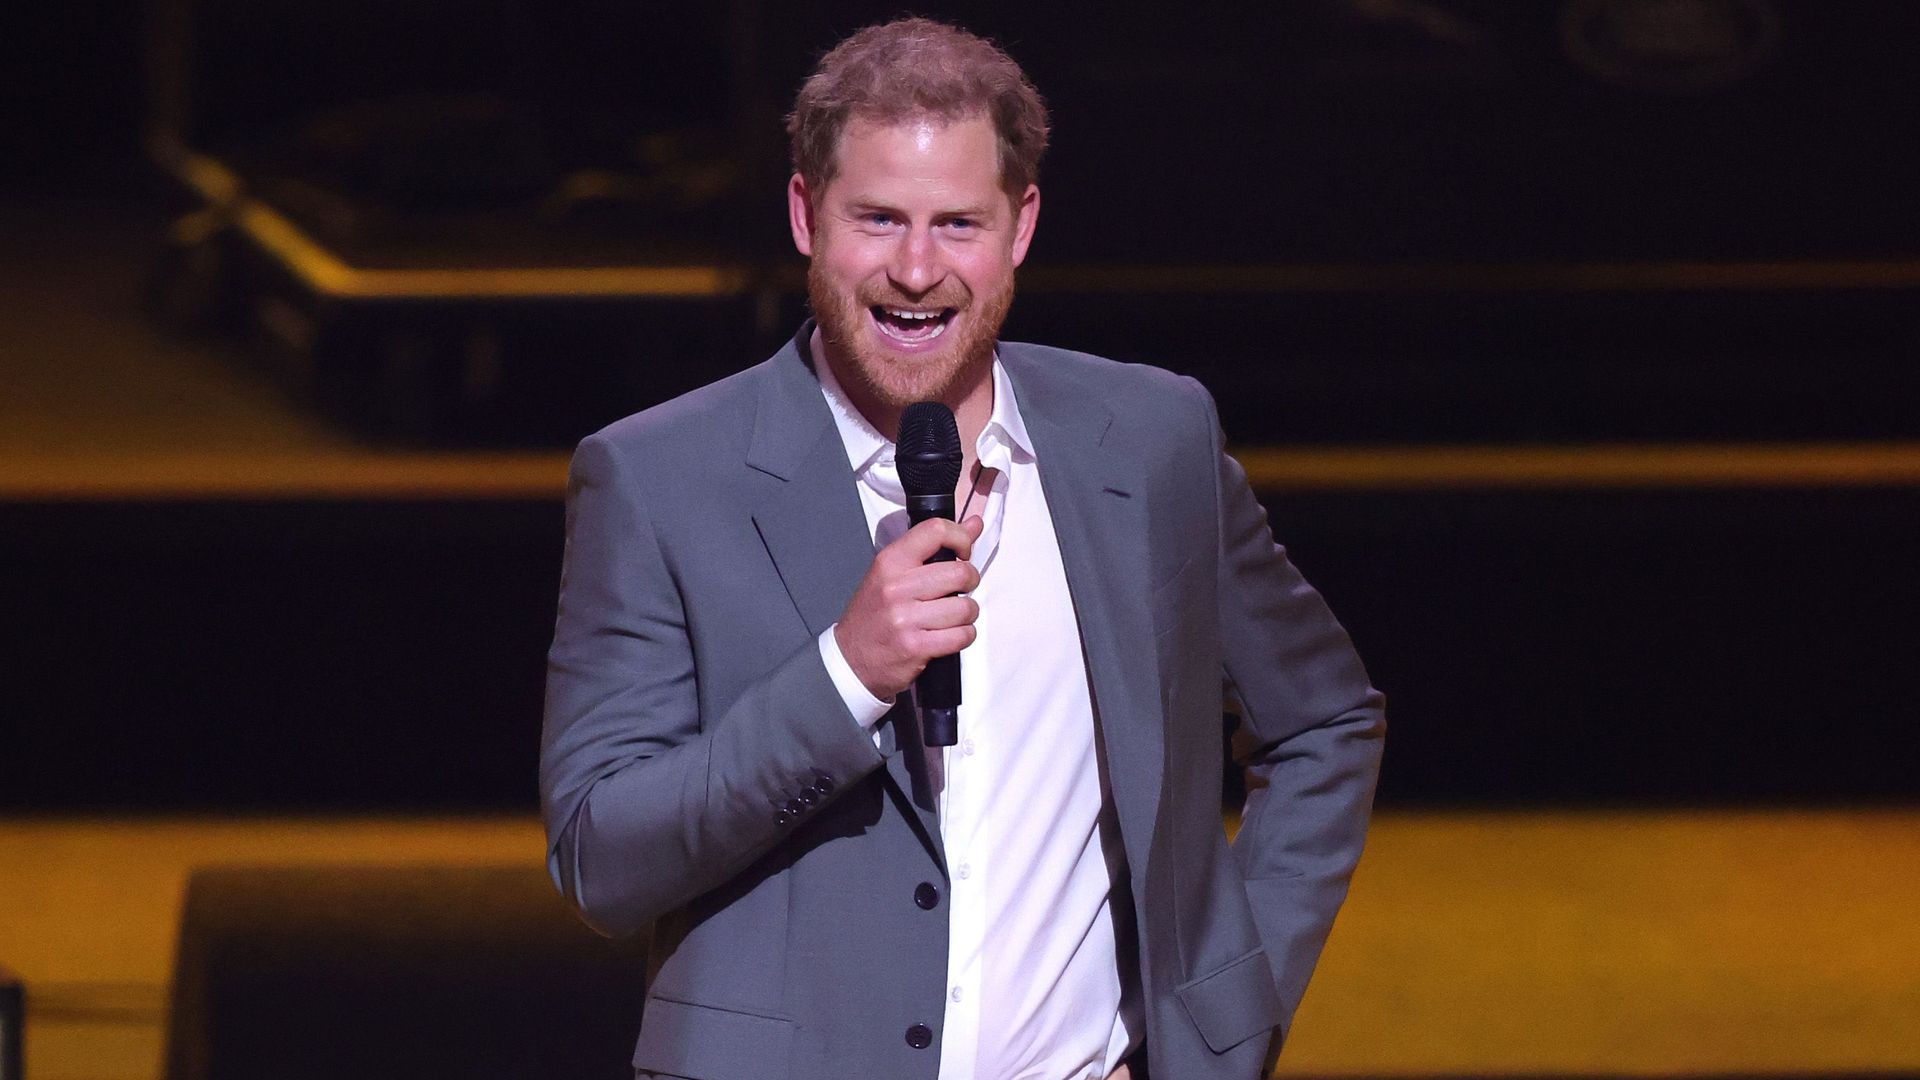 Prince Harry on stage at the Invictus Games The Hague